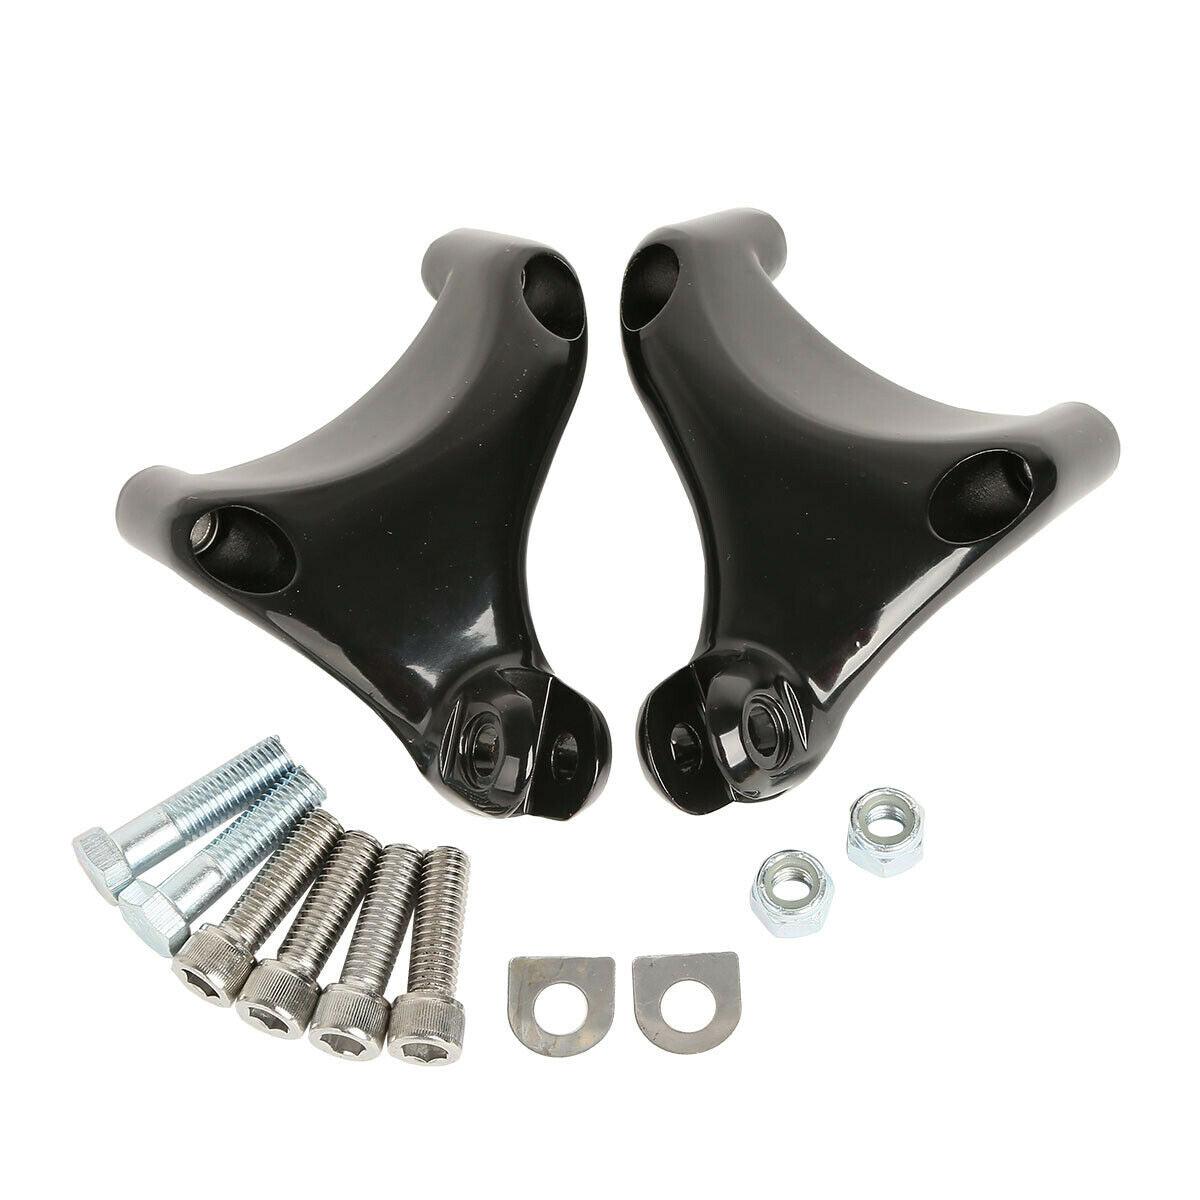 Passenger Rear Footpegs Foot Pegs Mount Fit For Harley SportsterXL883 1200 04-13 - Moto Life Products